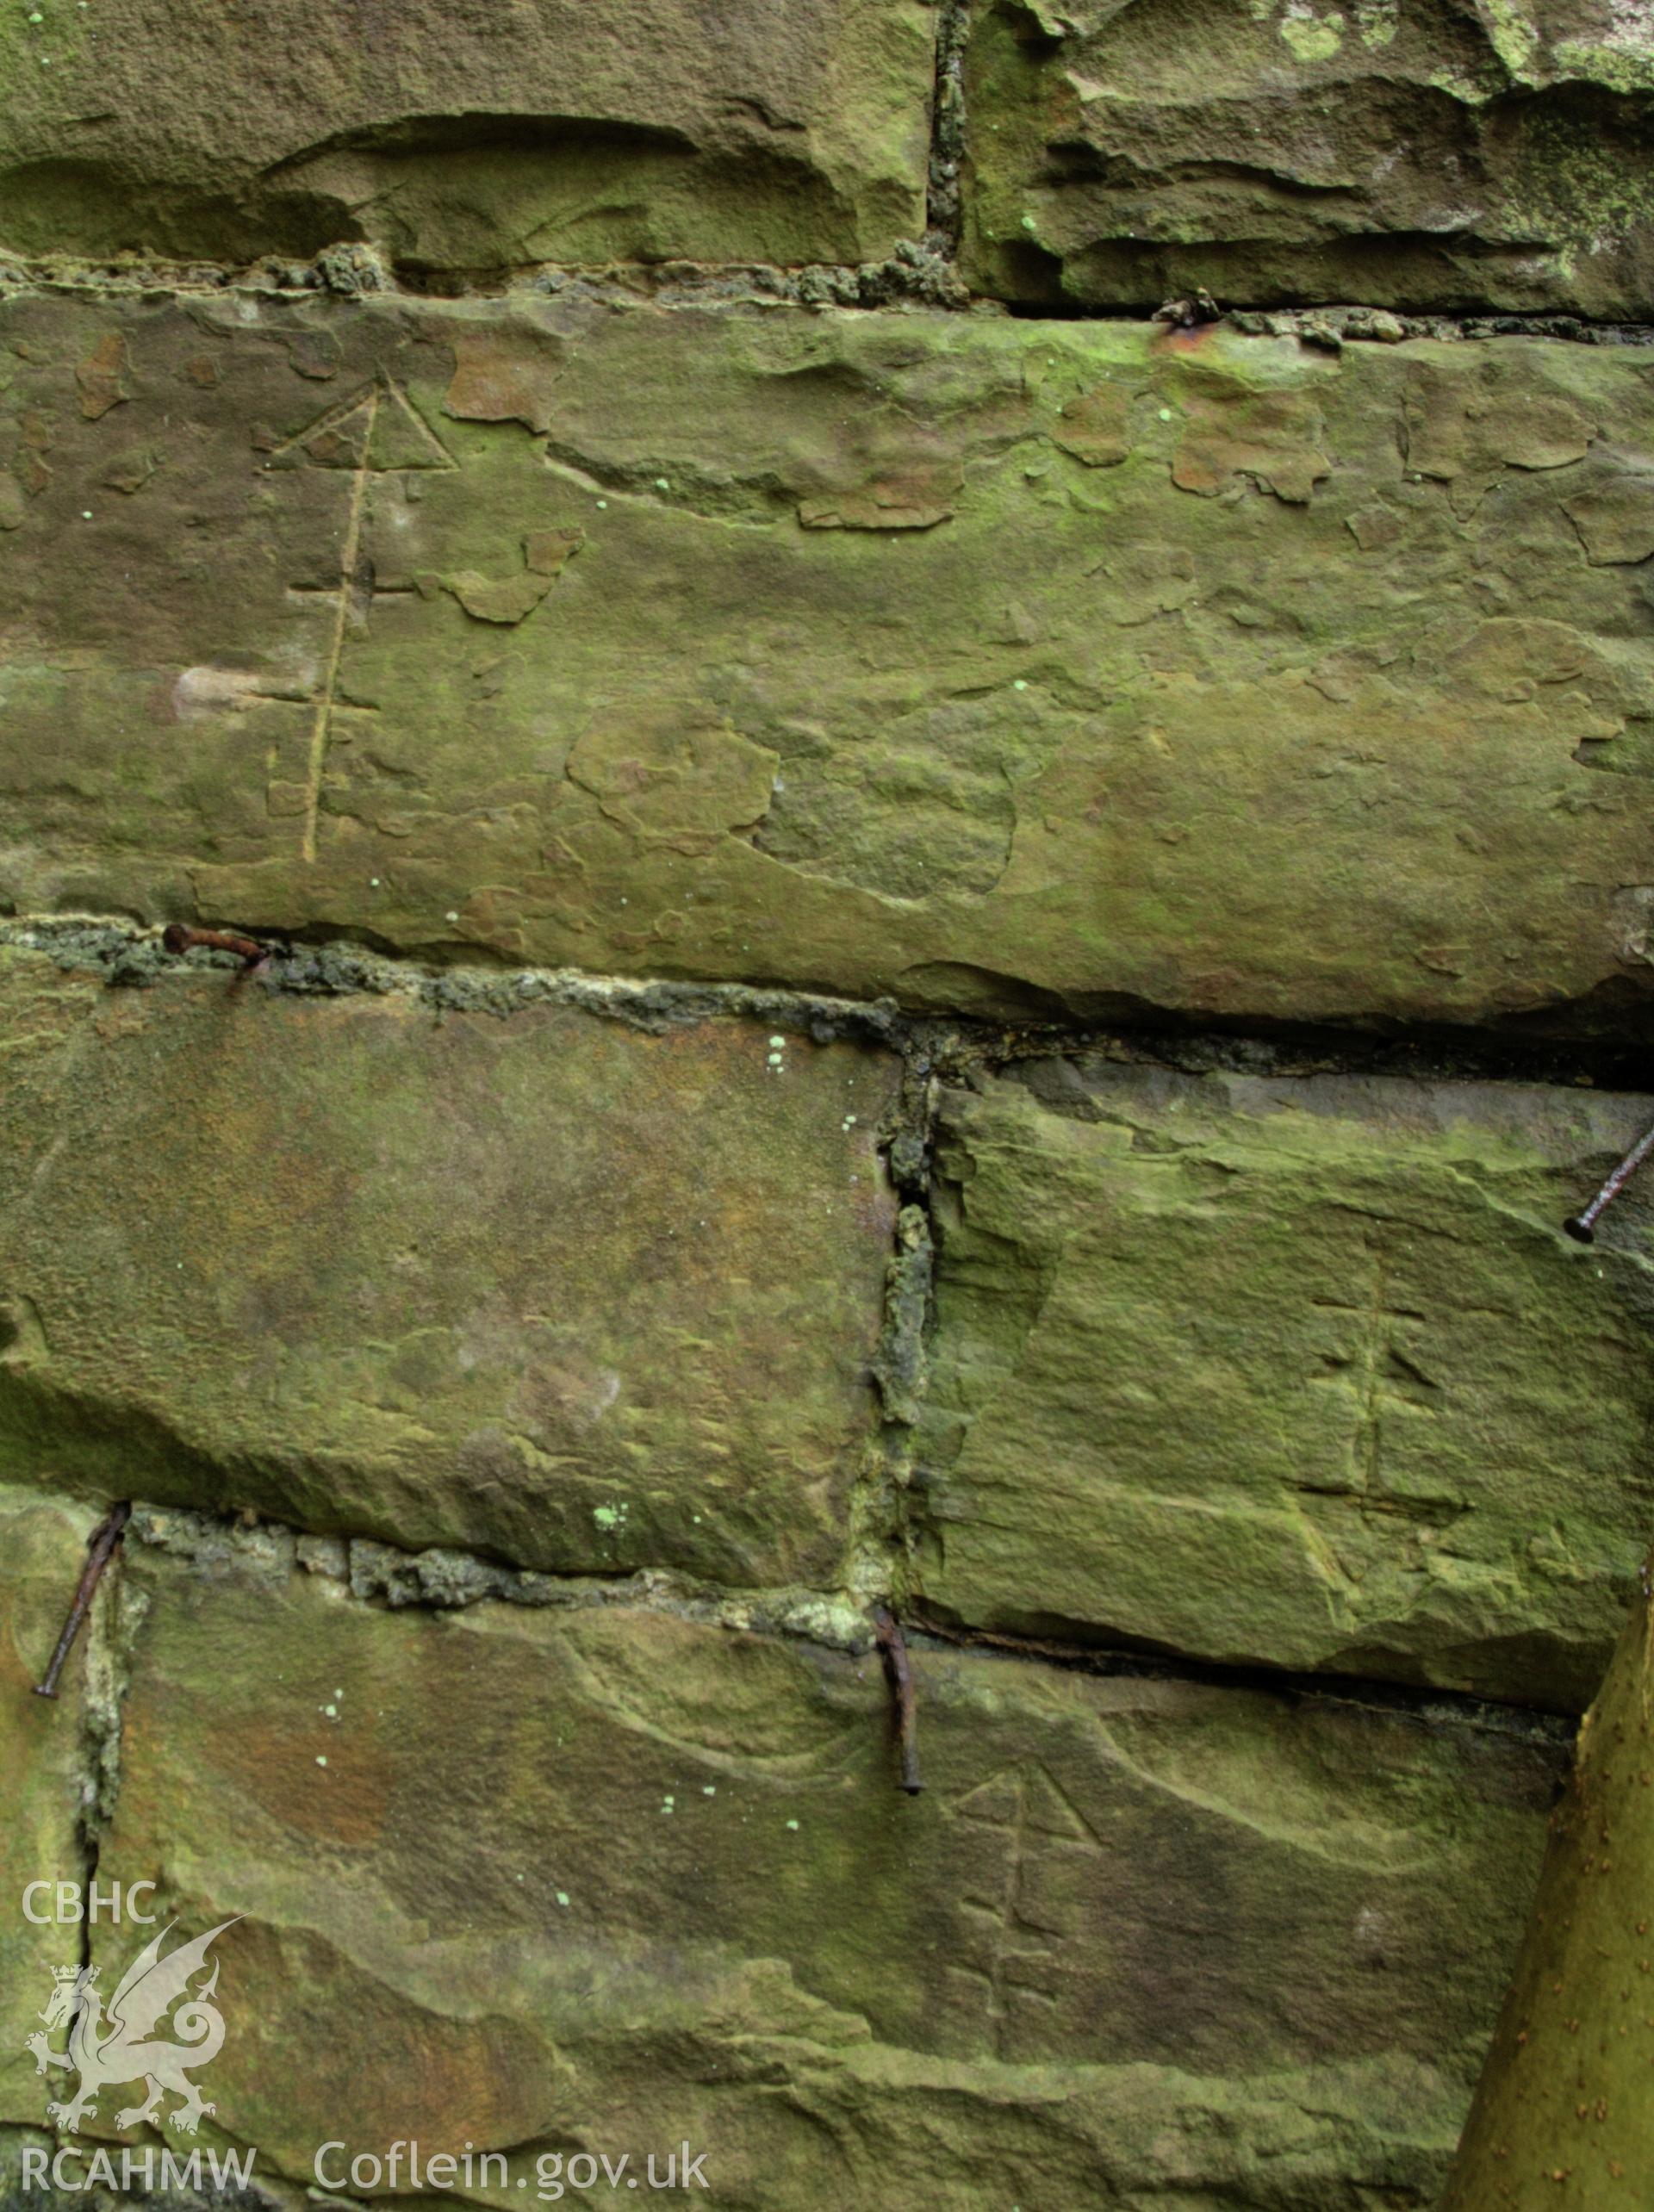 Colour photo showing masons marks on the stone piers of the viaduct, taken by Mark Evans, January 2017.